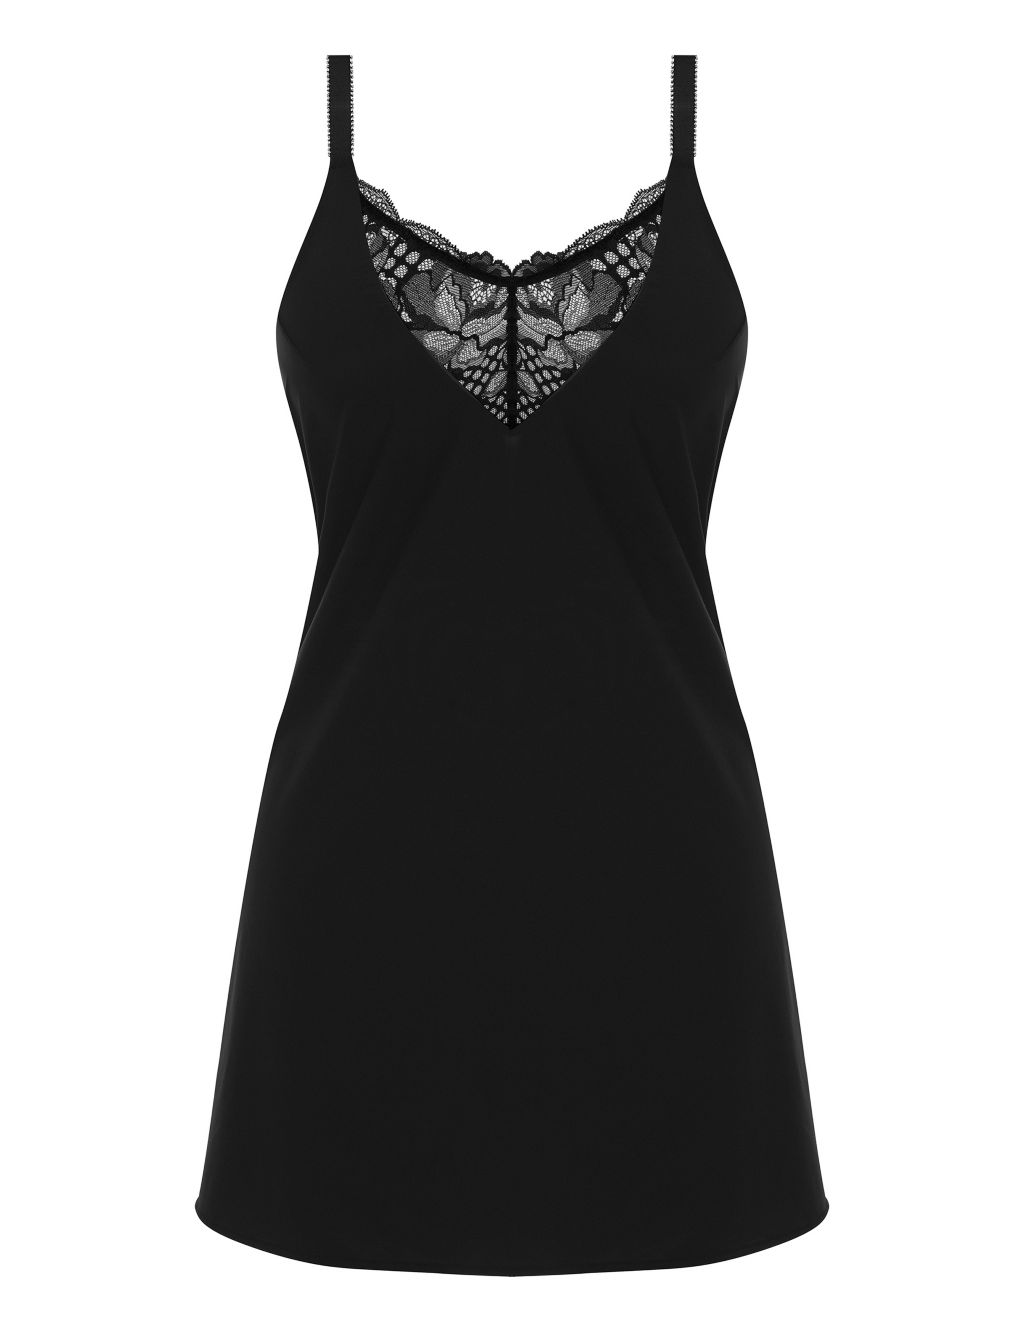 Reflect Lace Trim Chemise 1 of 4